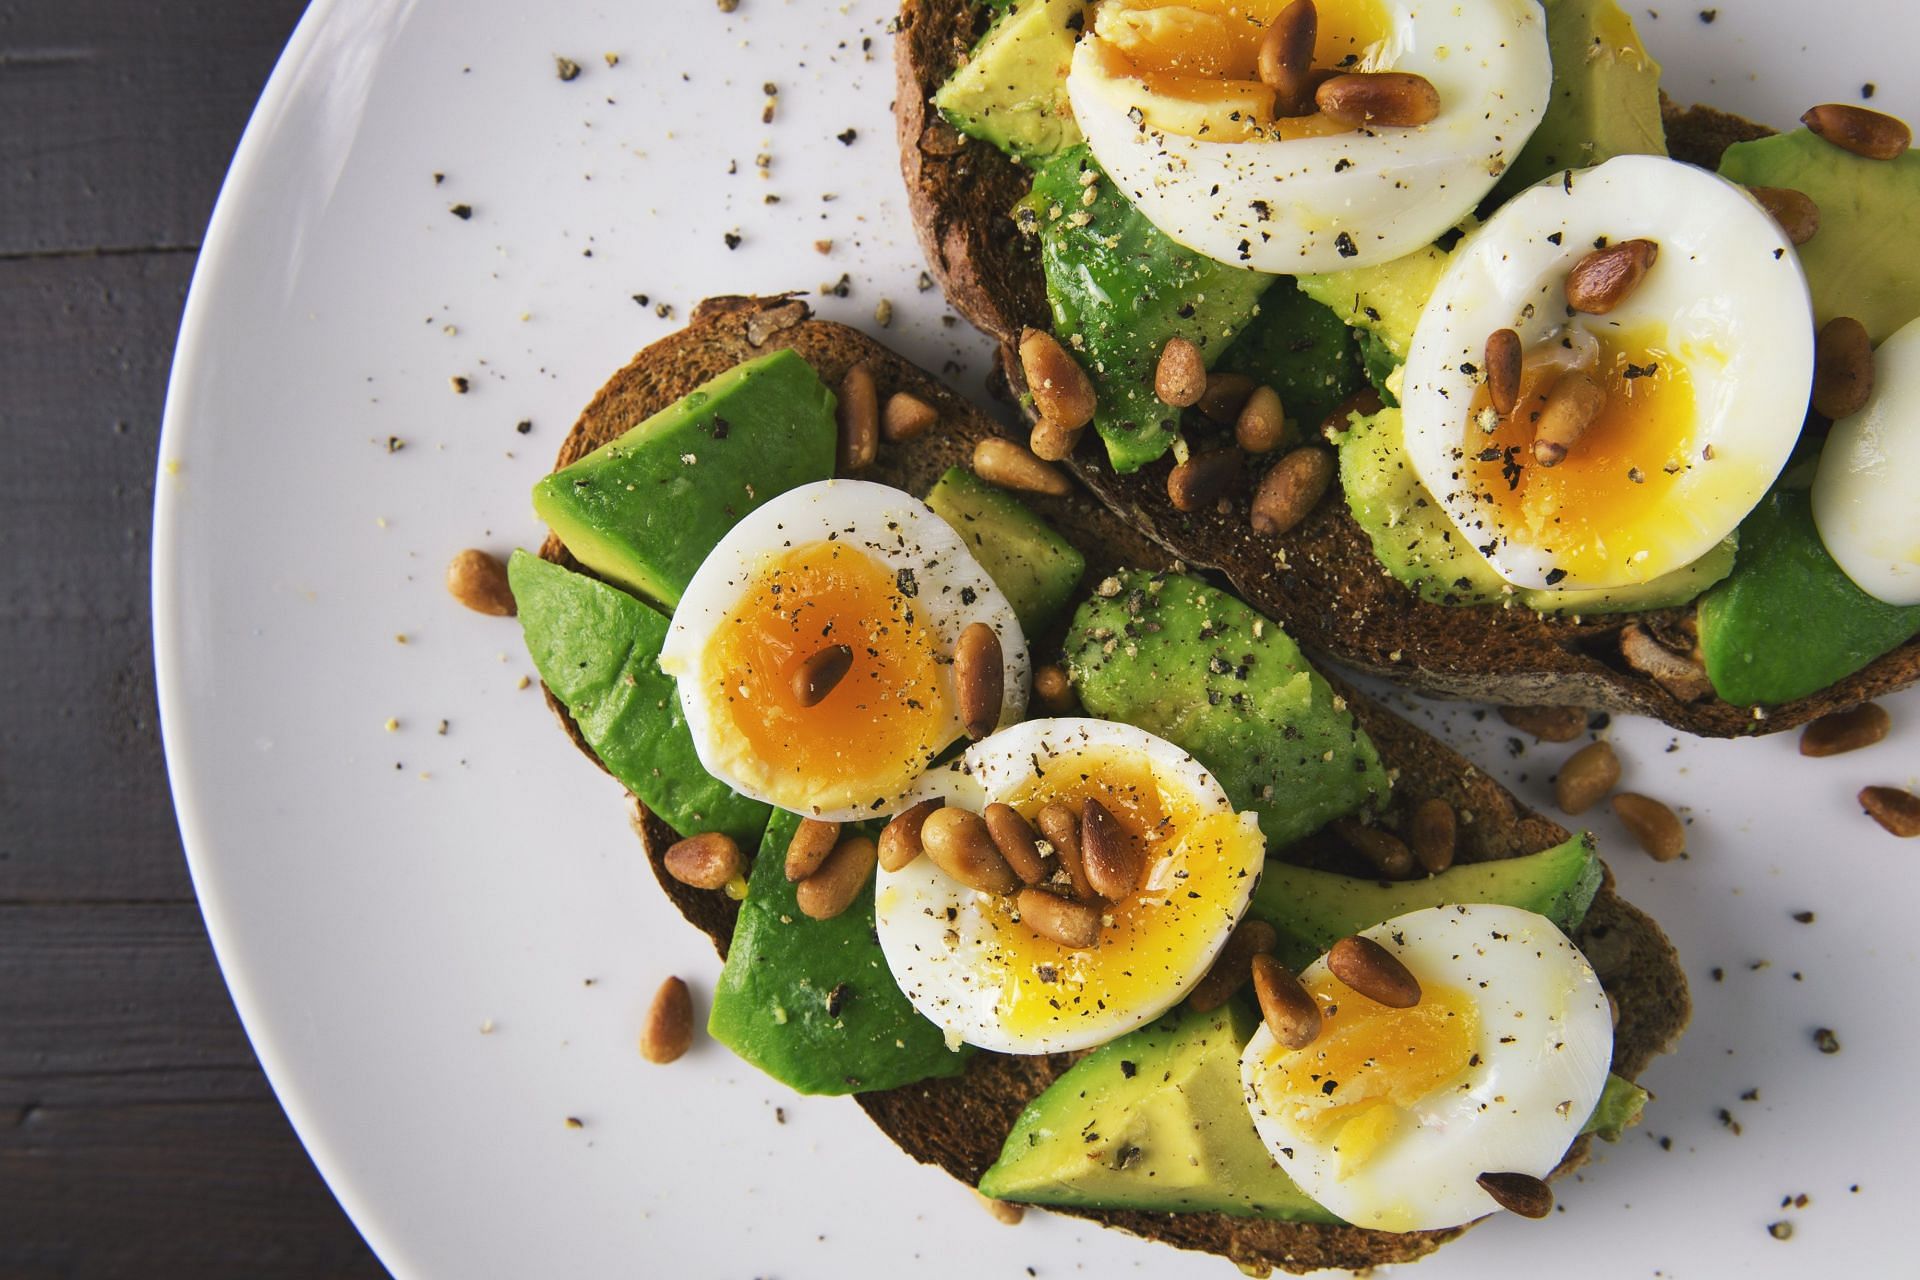 Benefits of adding brain foods to your diet (image sourced via Pexels / Photo by Foode factor)